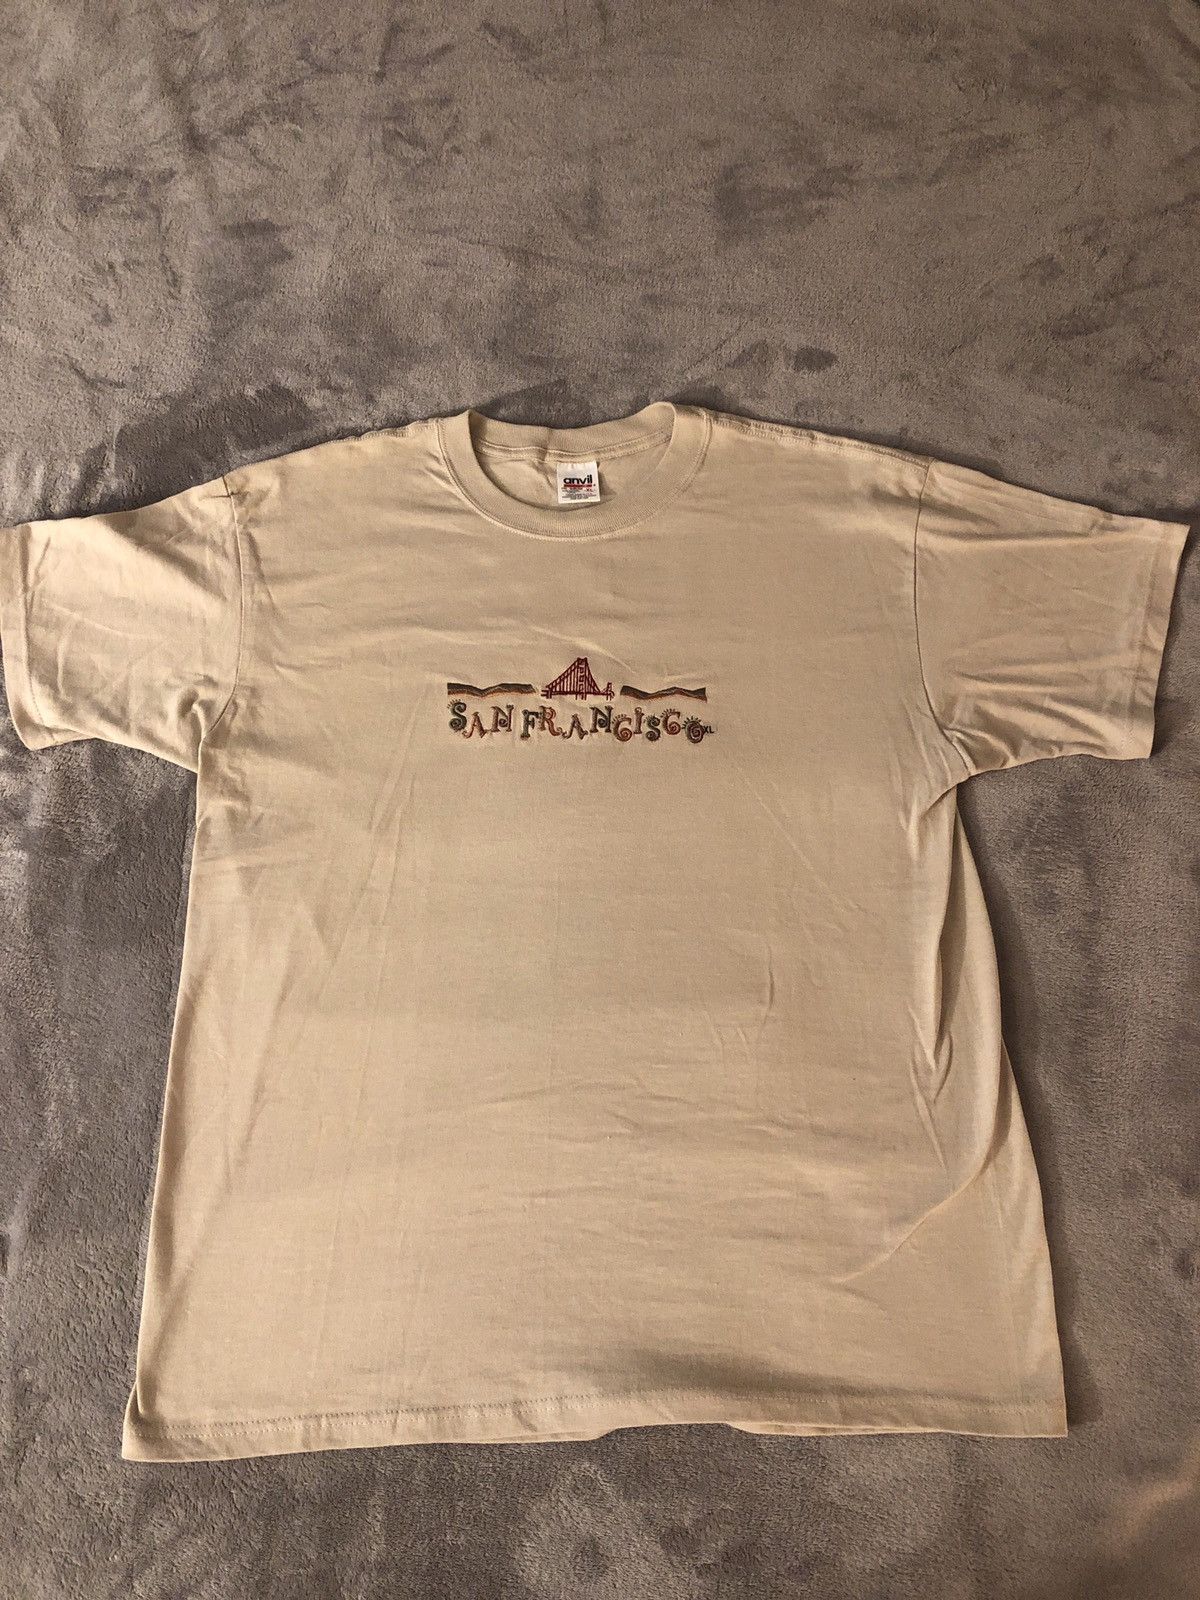 Anvil San Francisco Embroidered T-Shirt | Grailed